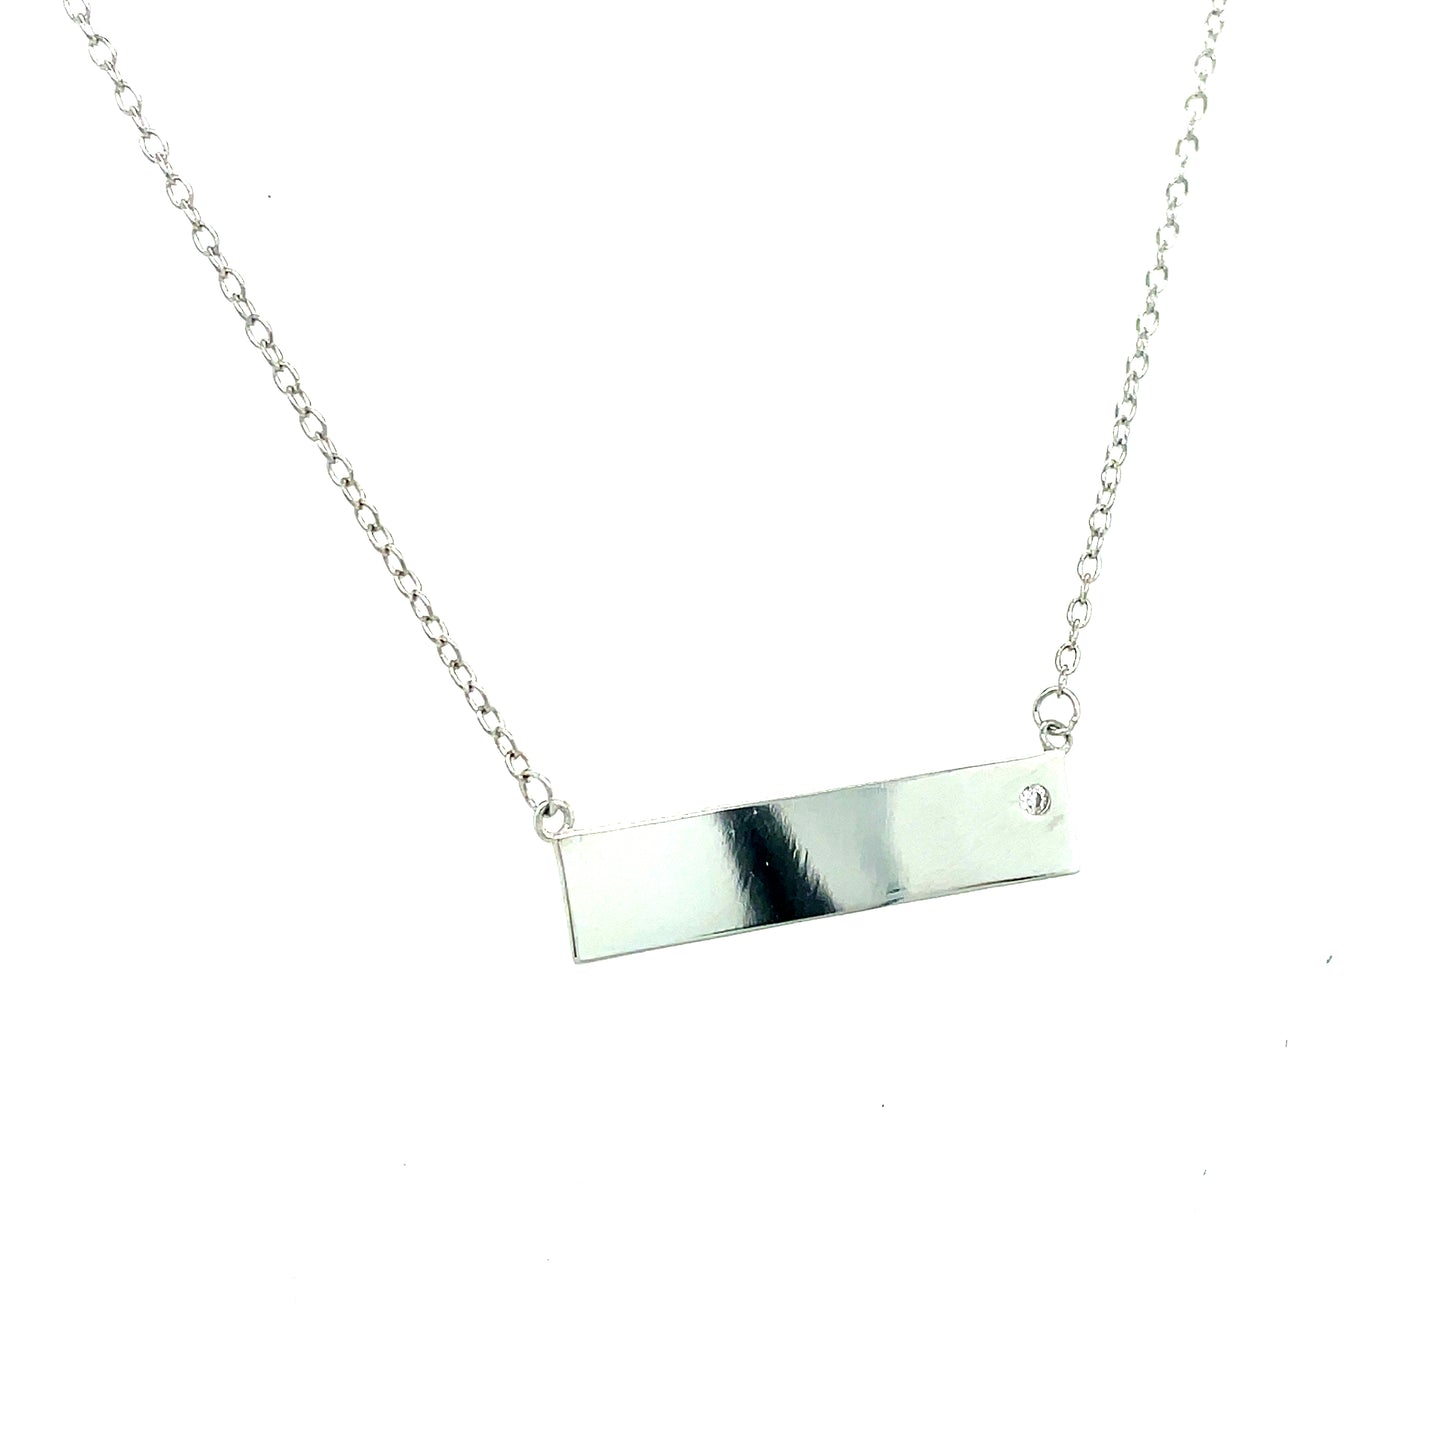 Sterling Silver Bar Necklet with CZ